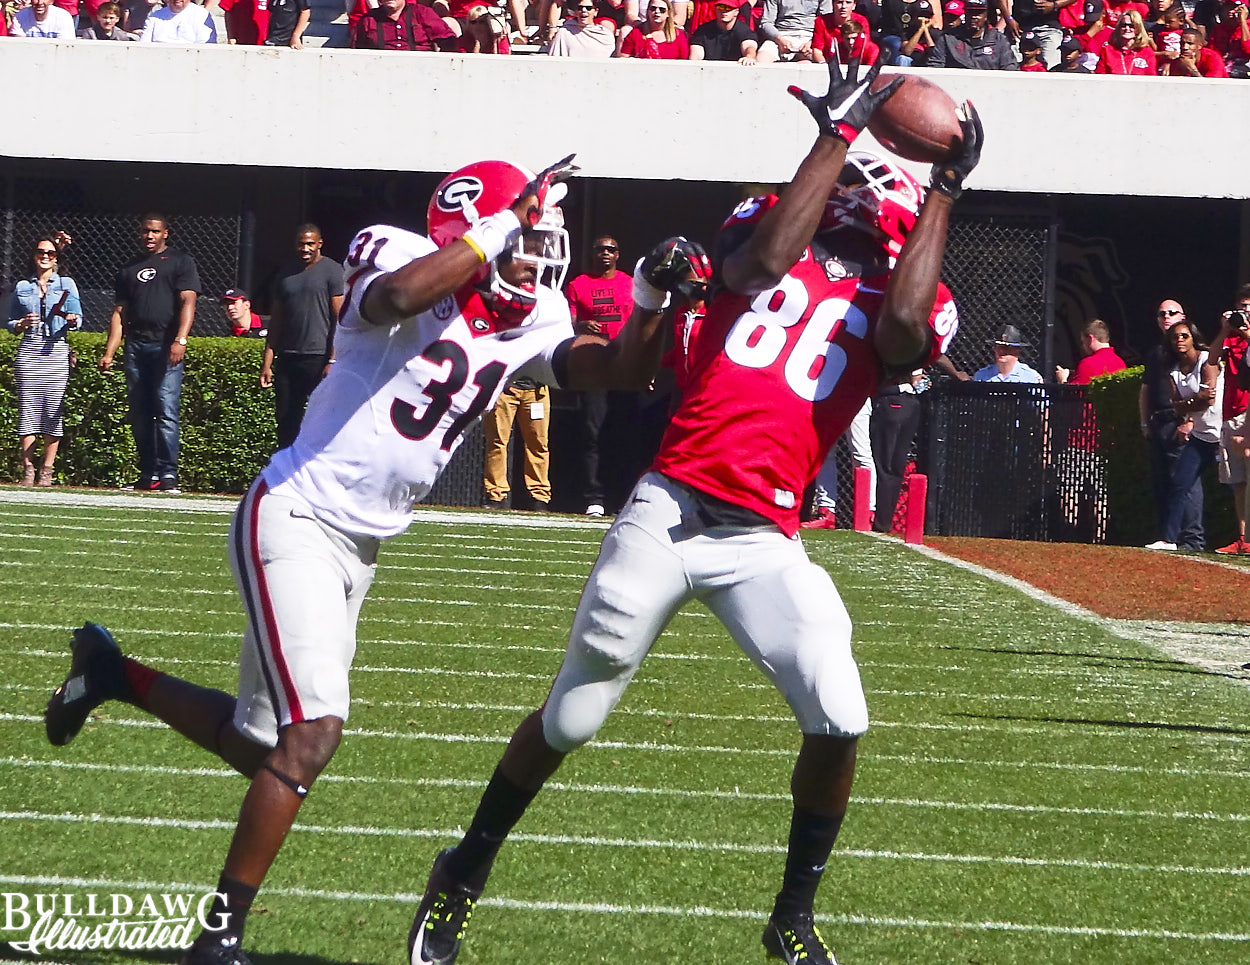 Riley Ridley (86) halls in the pass as Shattle Fenteng (31) defends